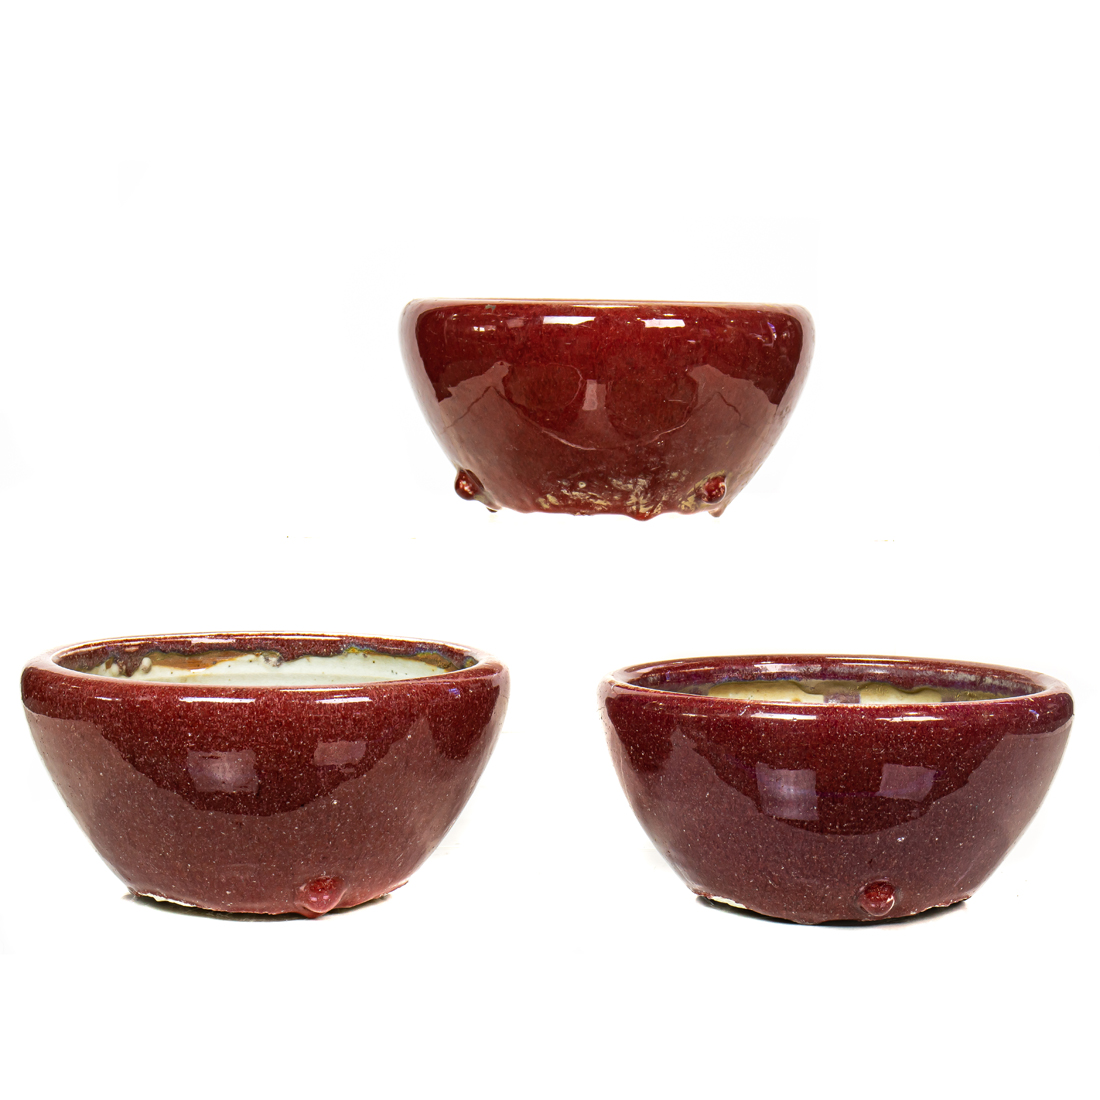  LOT OF 3 CHINESE OX BLOOD GLAZED 3a24a5